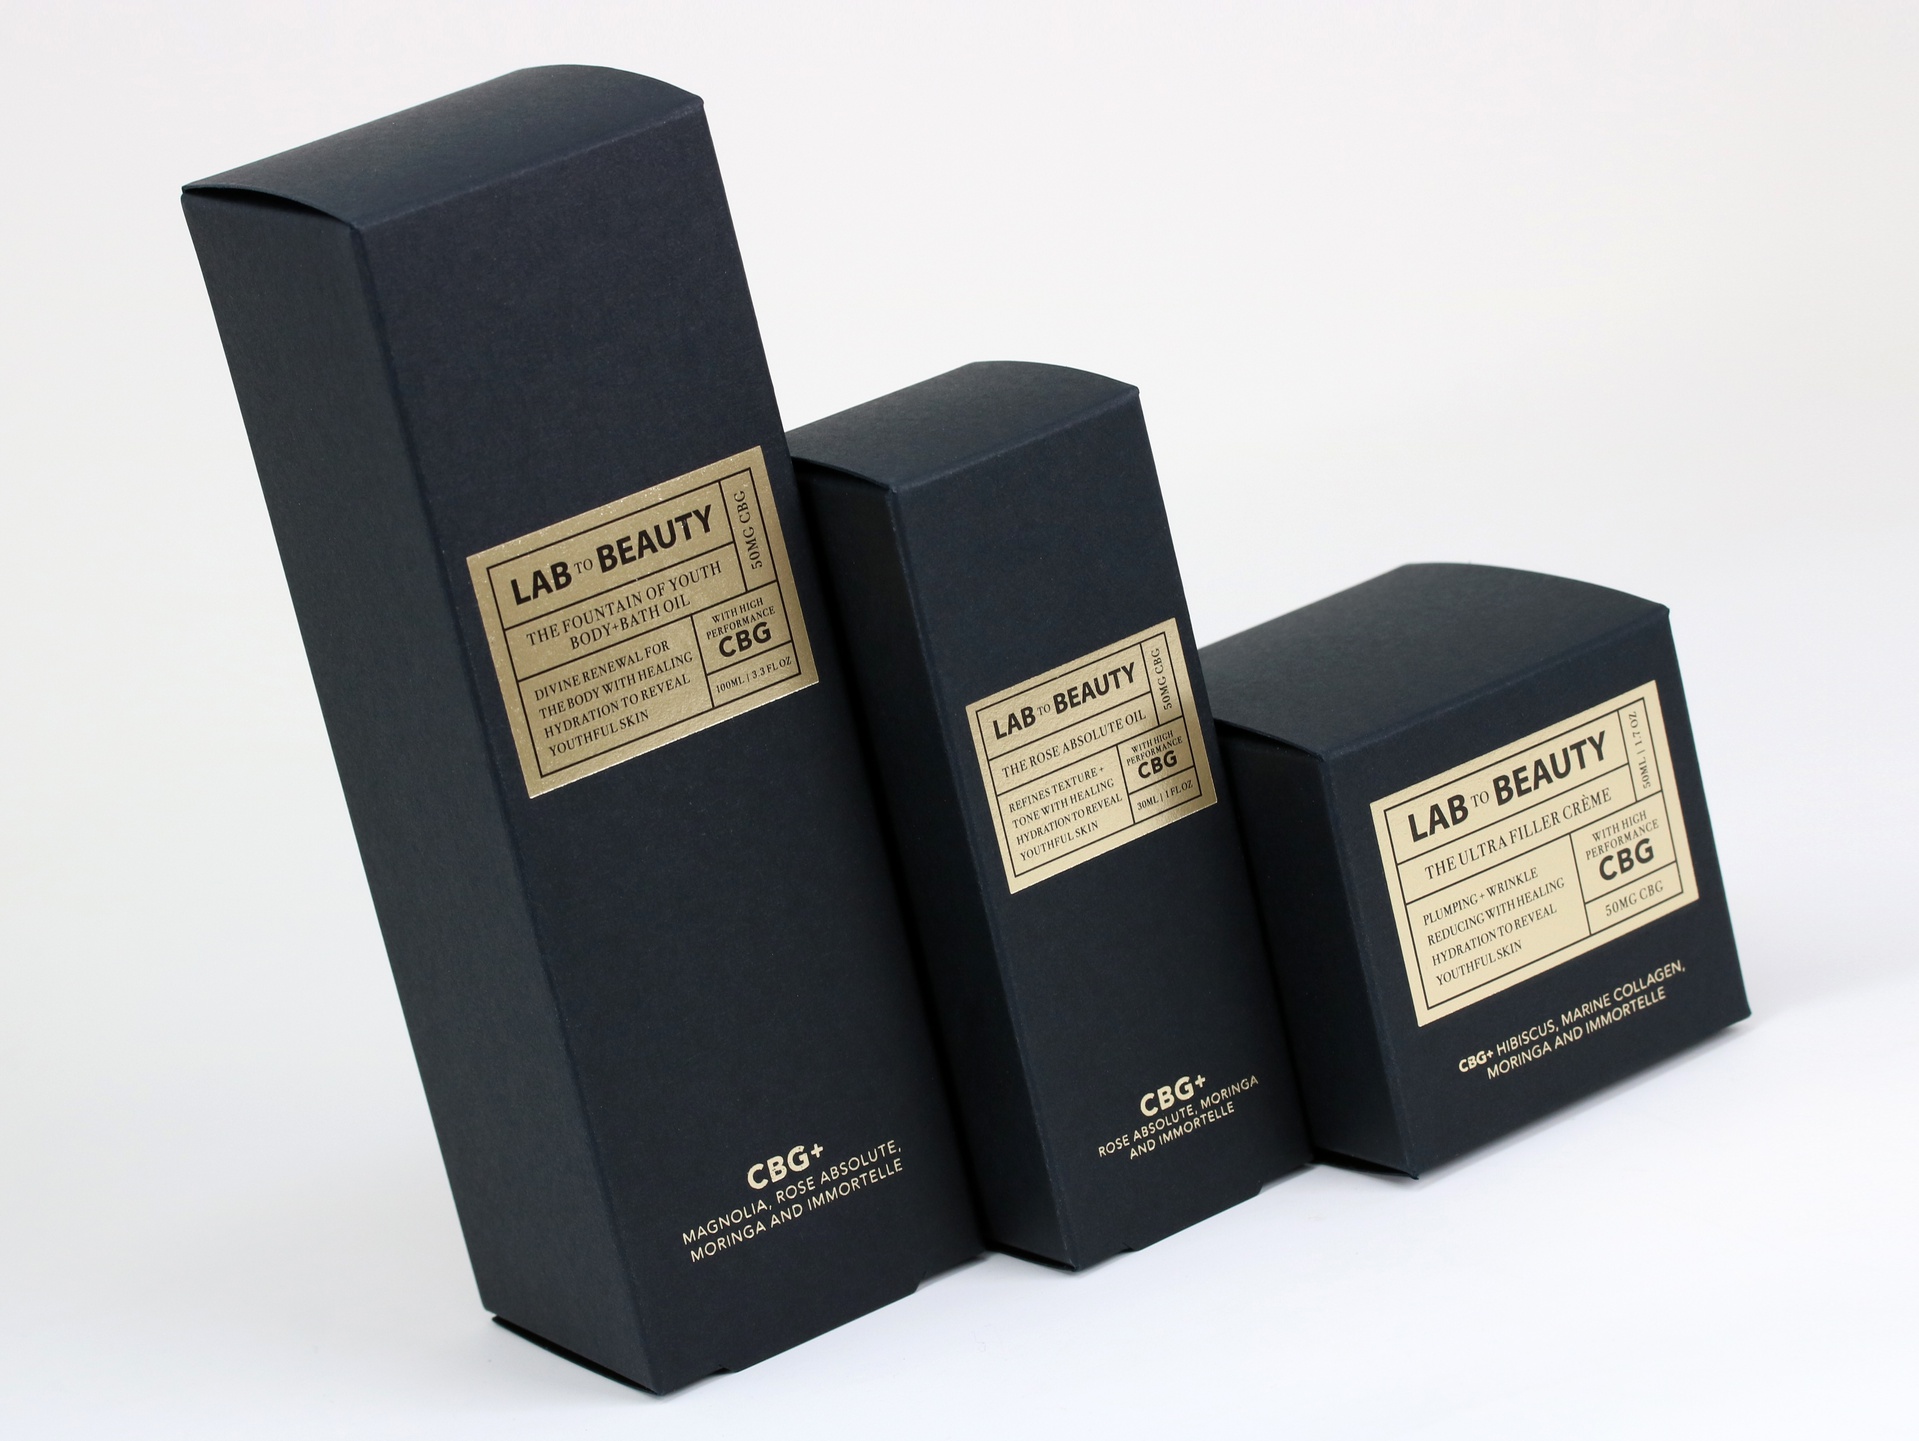 Lab to Beauty cannabis packaging features Neenah Folding Board Deep Black Vellum paperboard